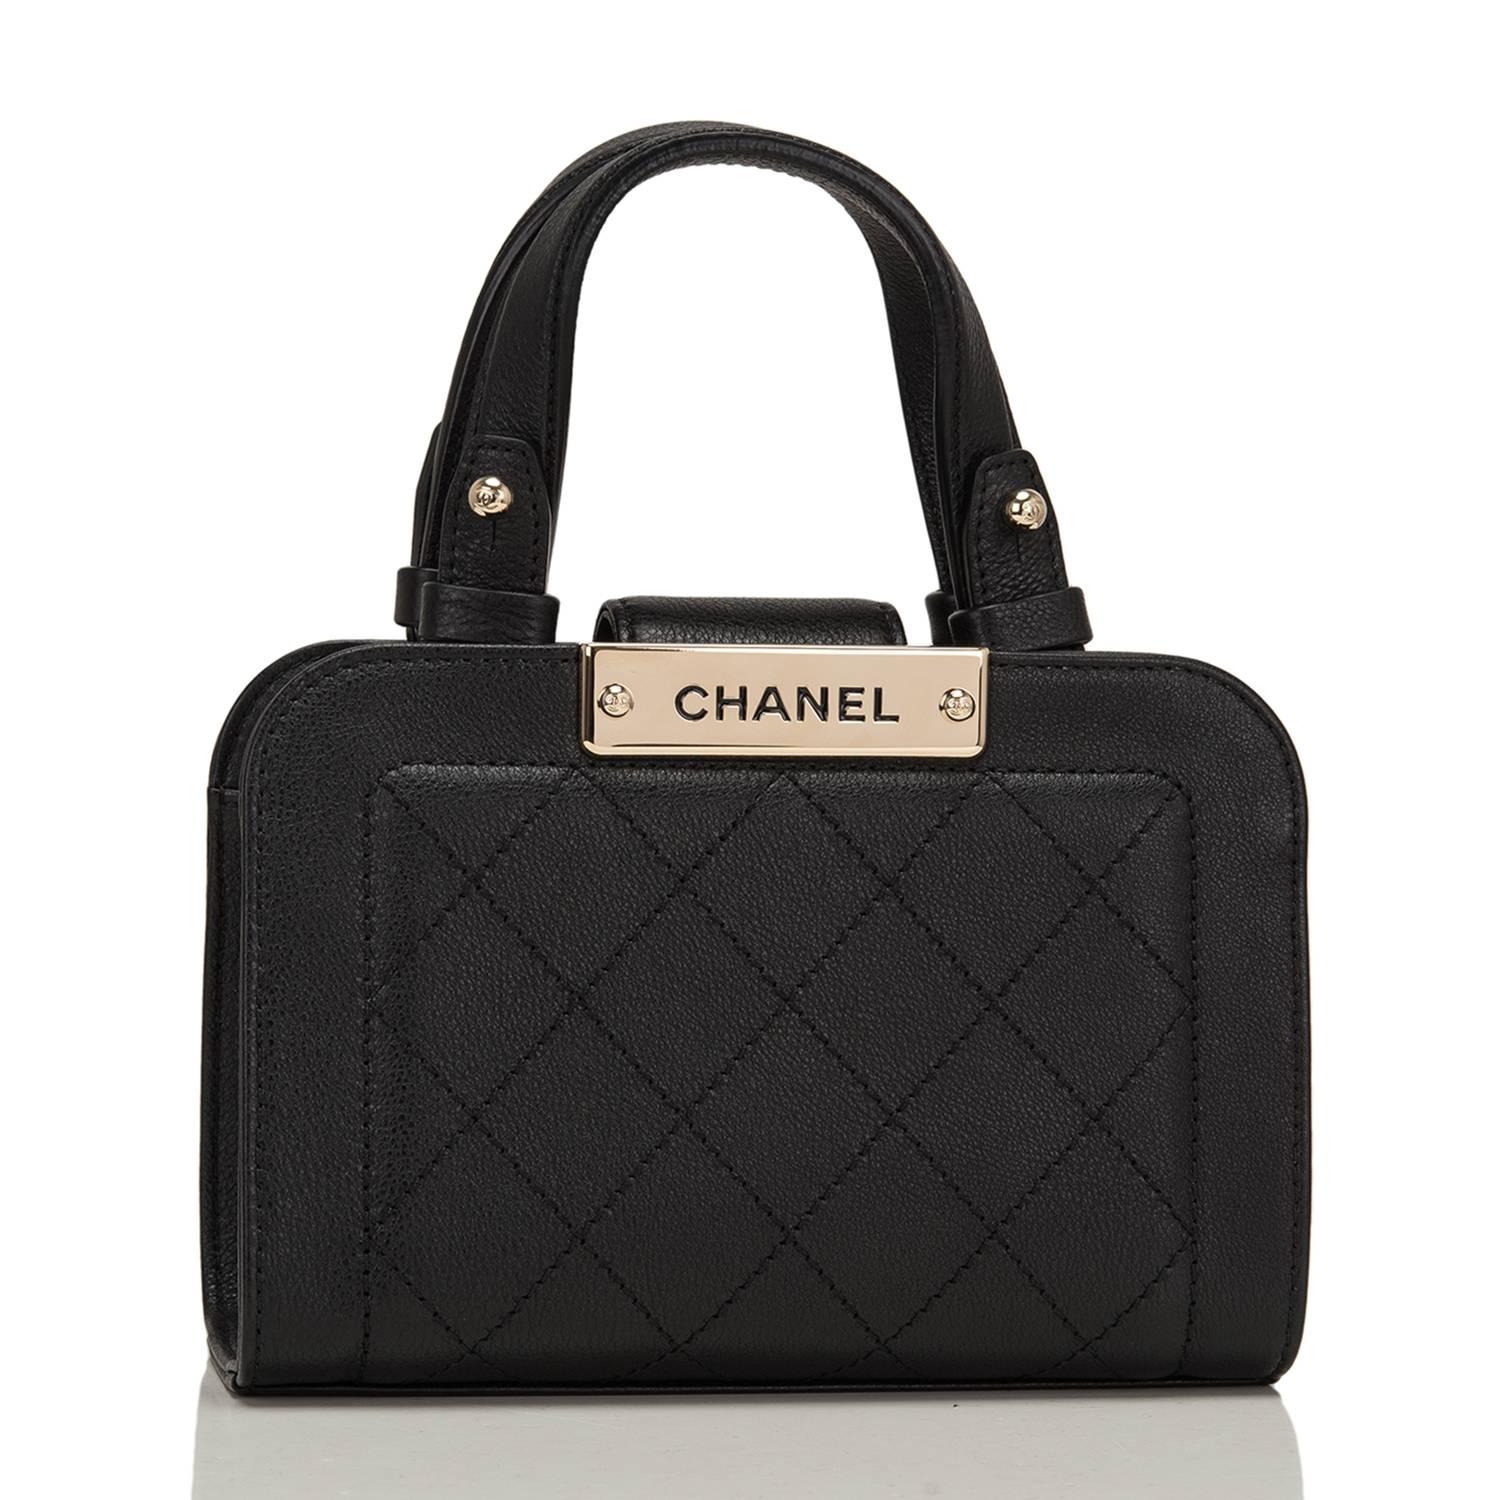 Chanel Small Label Click Shopping bag of quilted and smooth black grained calfskin leather and gold tone hardware.

This limited edition Chanel bag, from the 2017 cruise collection, features a magnetic front closure, double flap top handles, and a